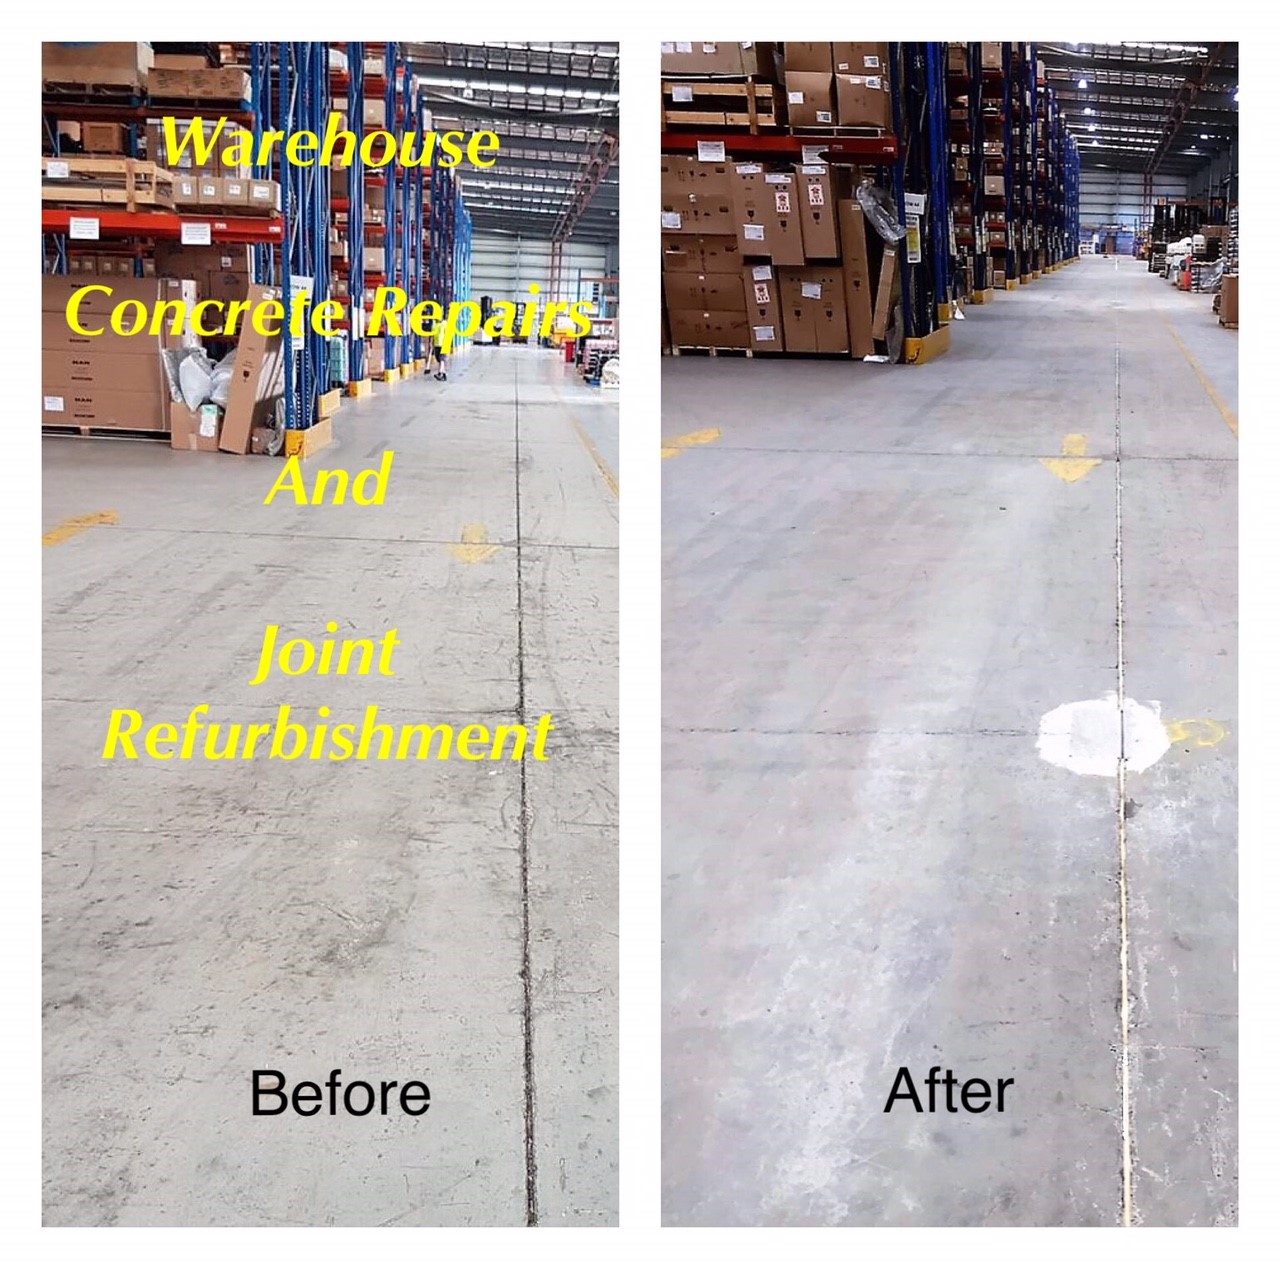 Warehouse Concrete Repairs And Joint Refurbishment - Waterstop Solutions